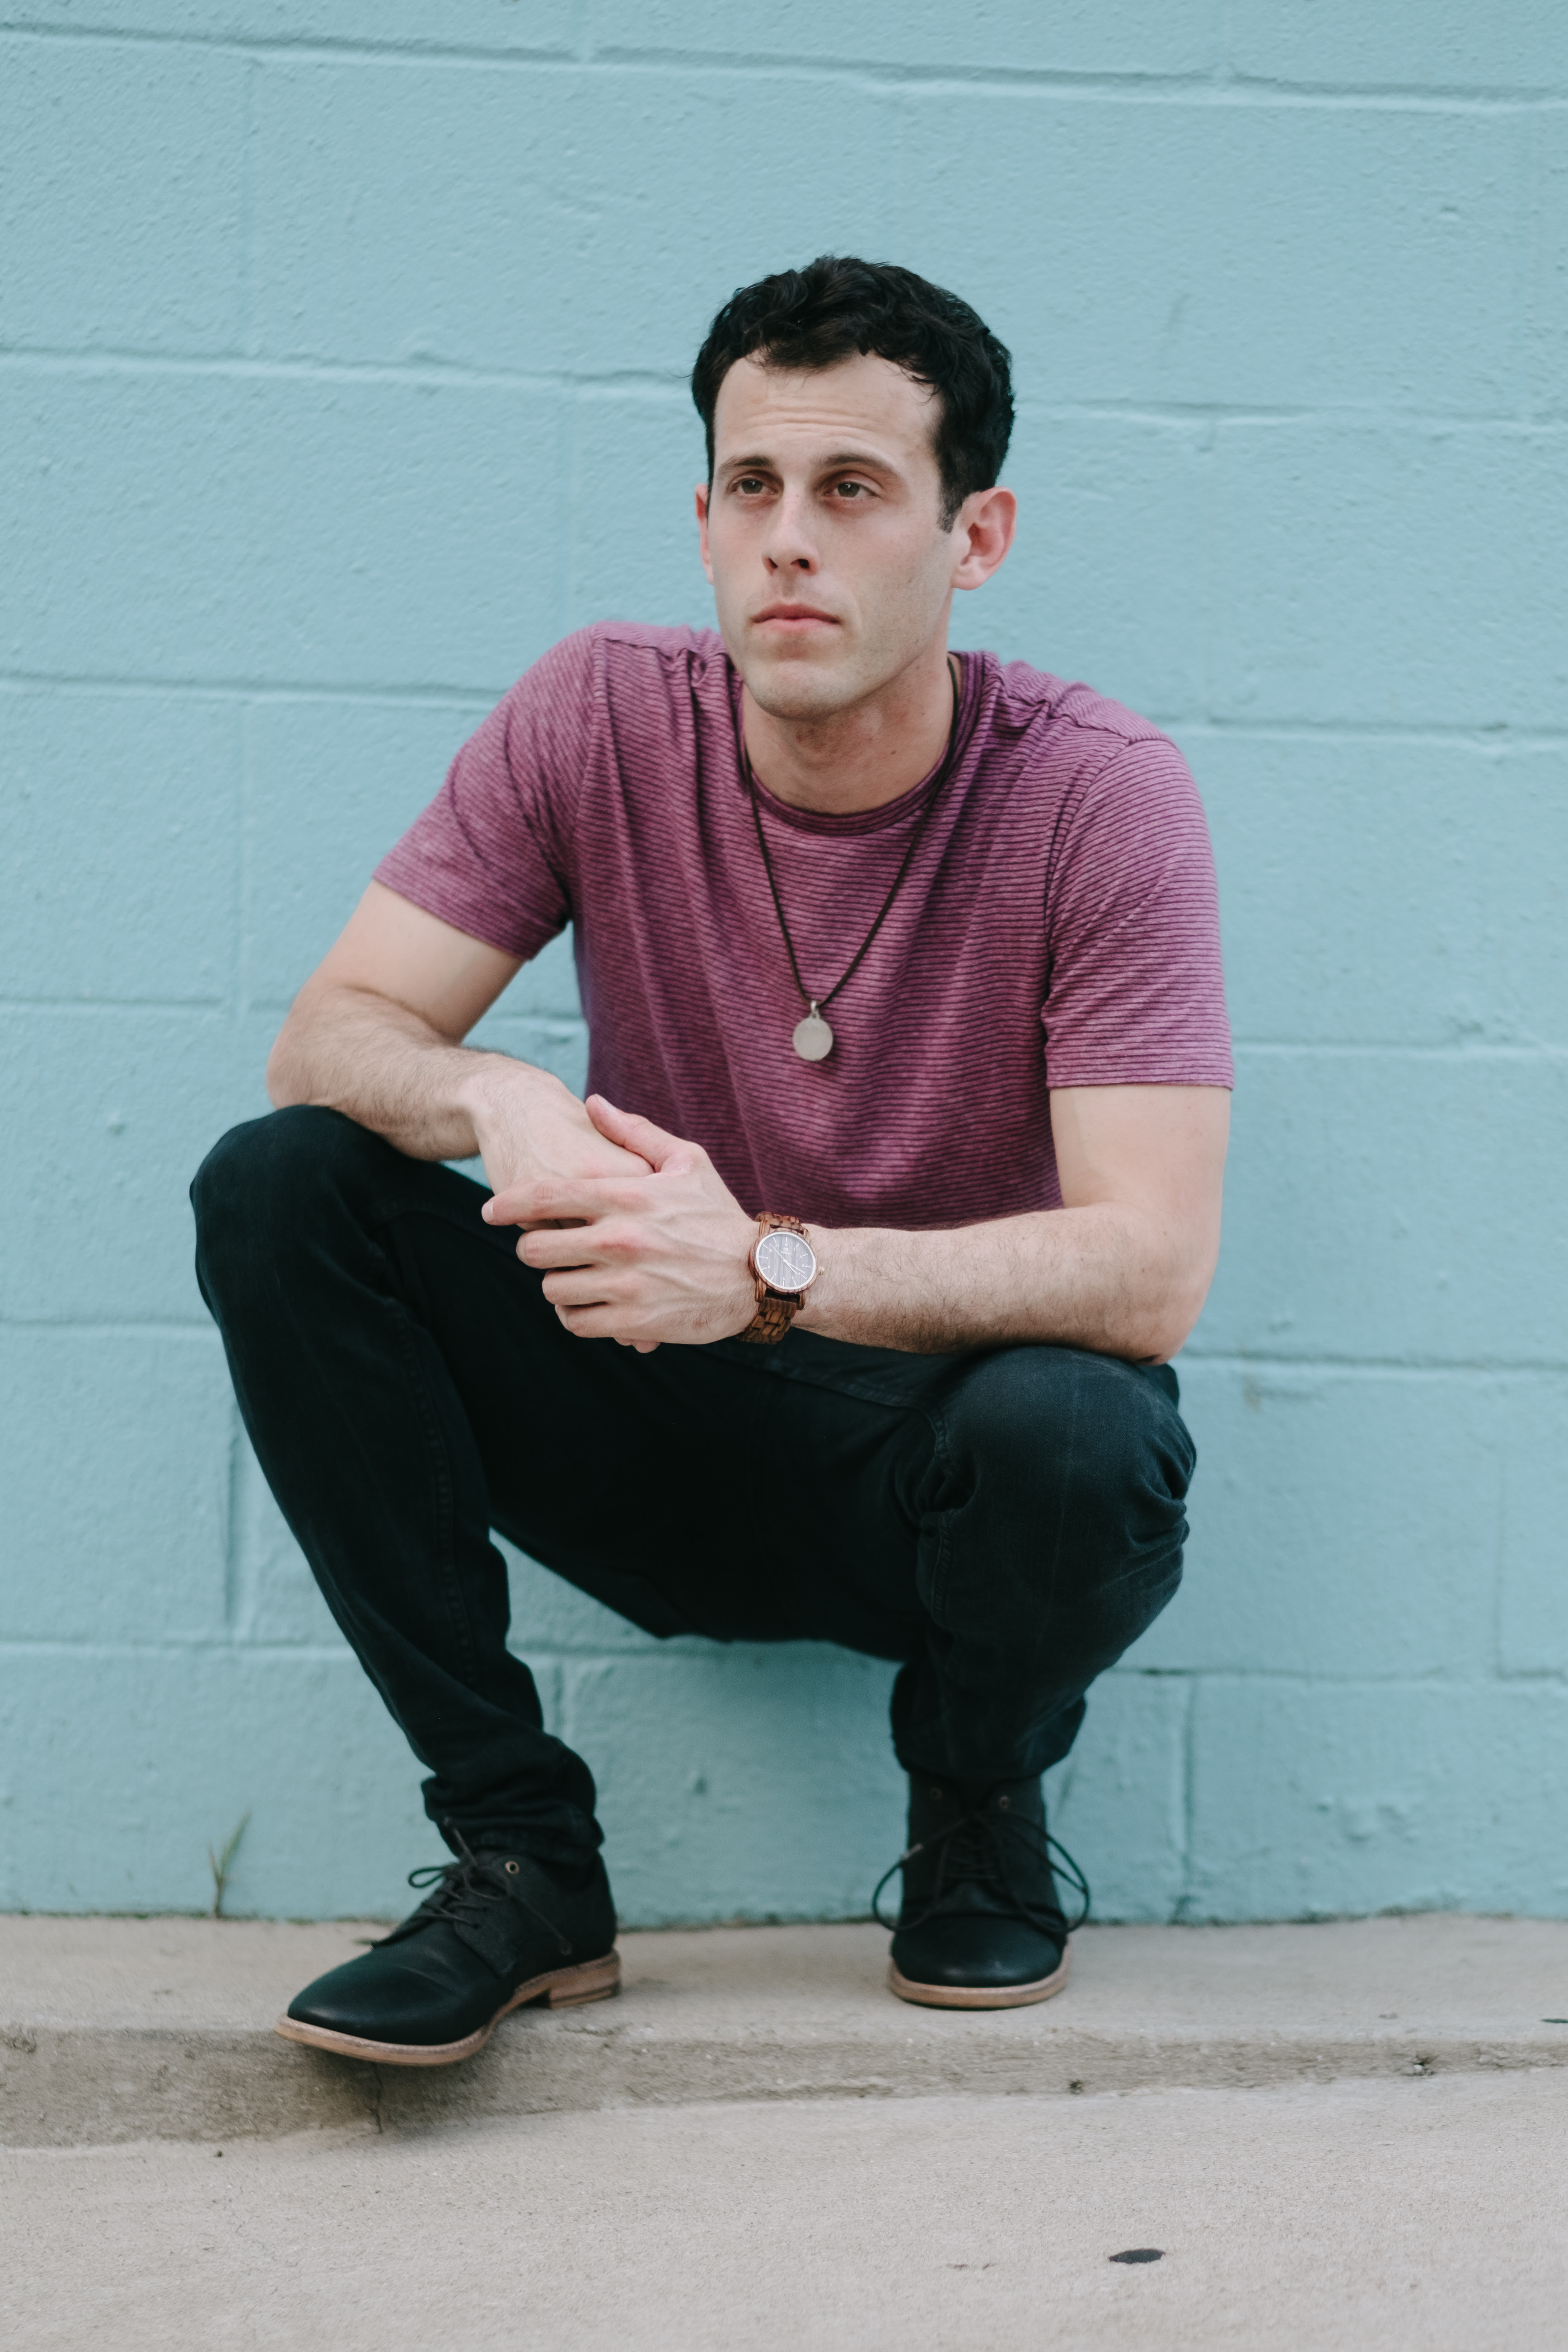 Beauty From Nashville:  Jake Fields – “For The Better, For The Worse”